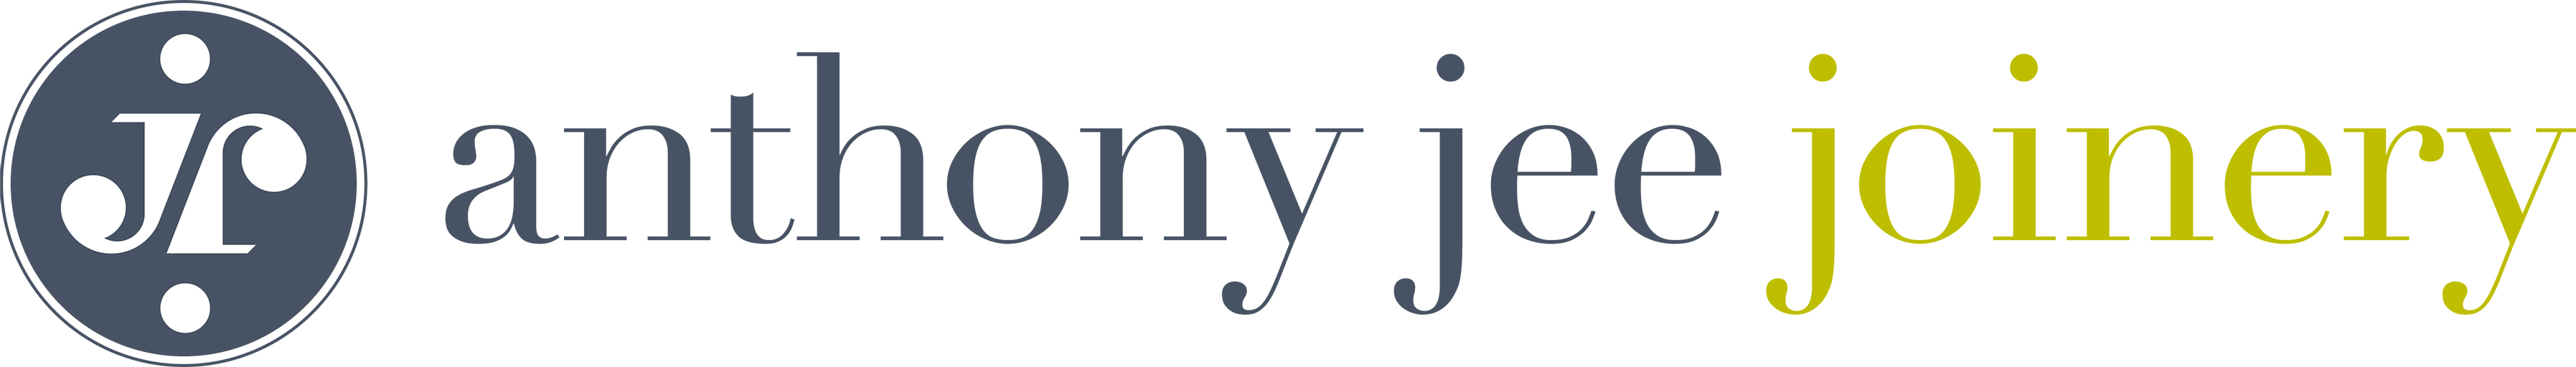 Anthony Jee Joinery